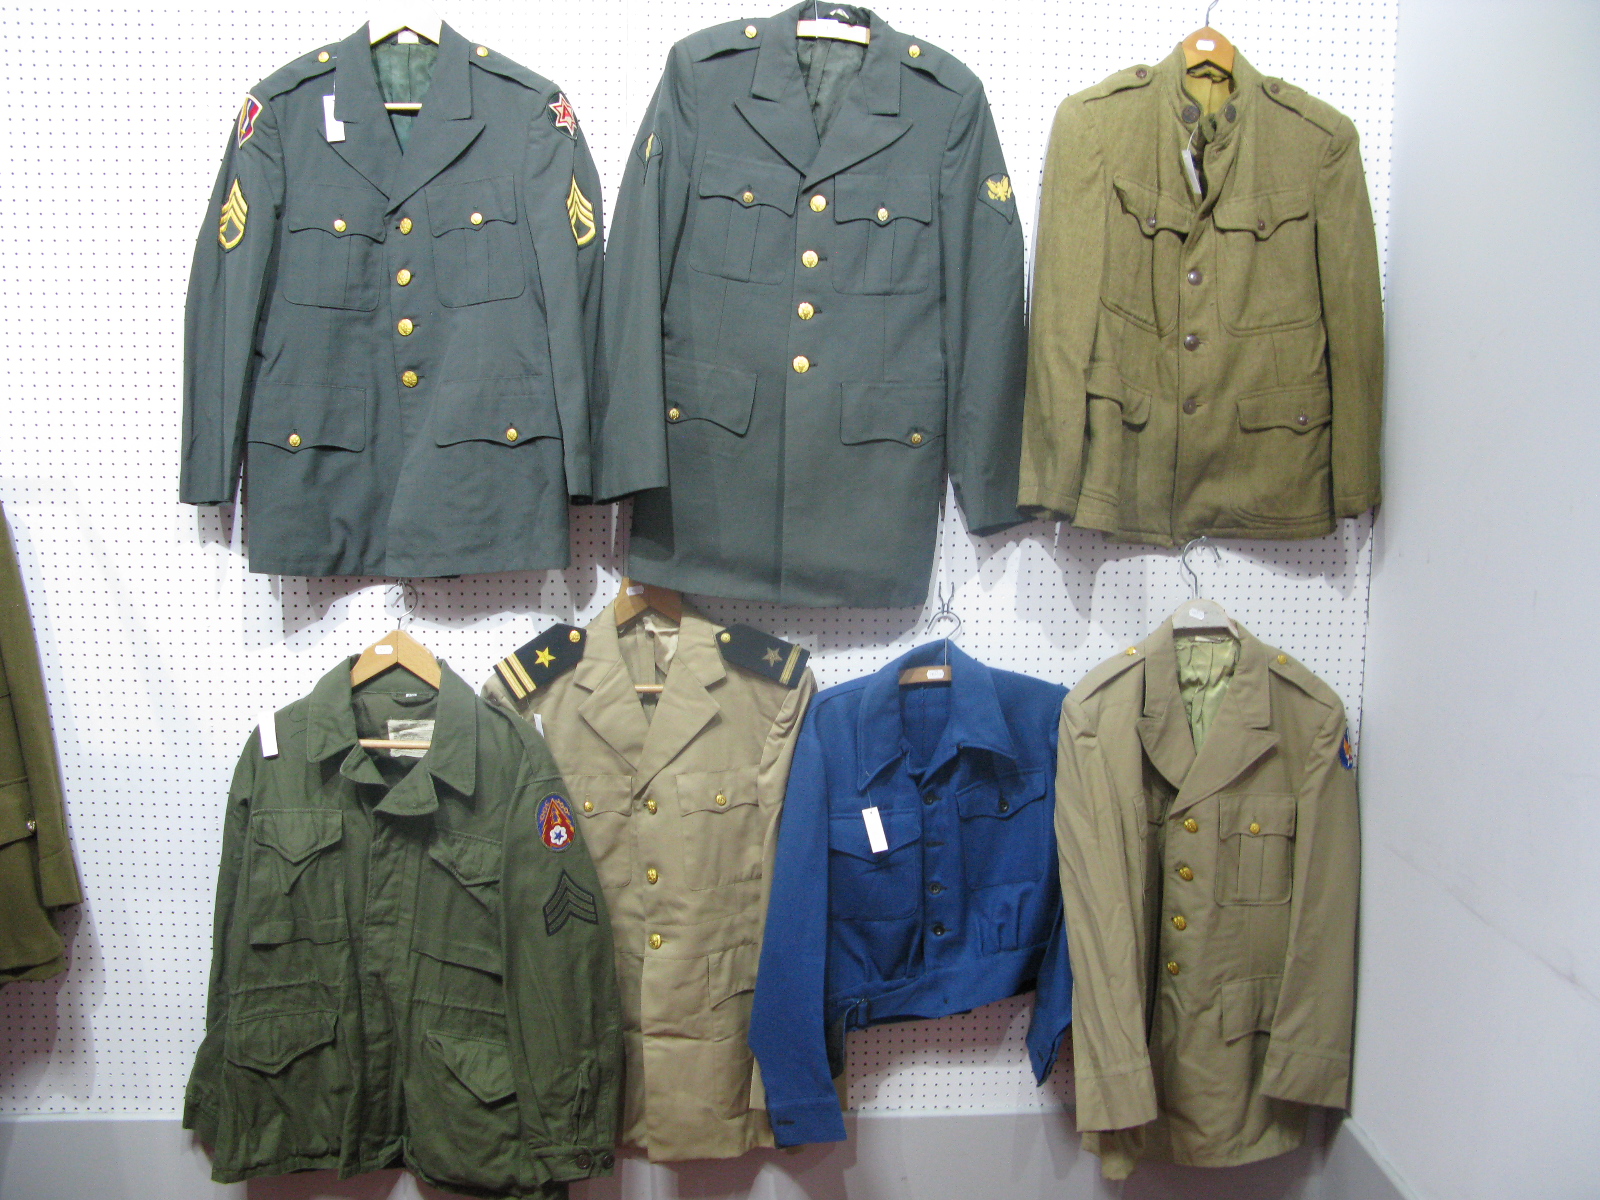 Seven Assorted Post War United States of America Army Tunics and Blouses.